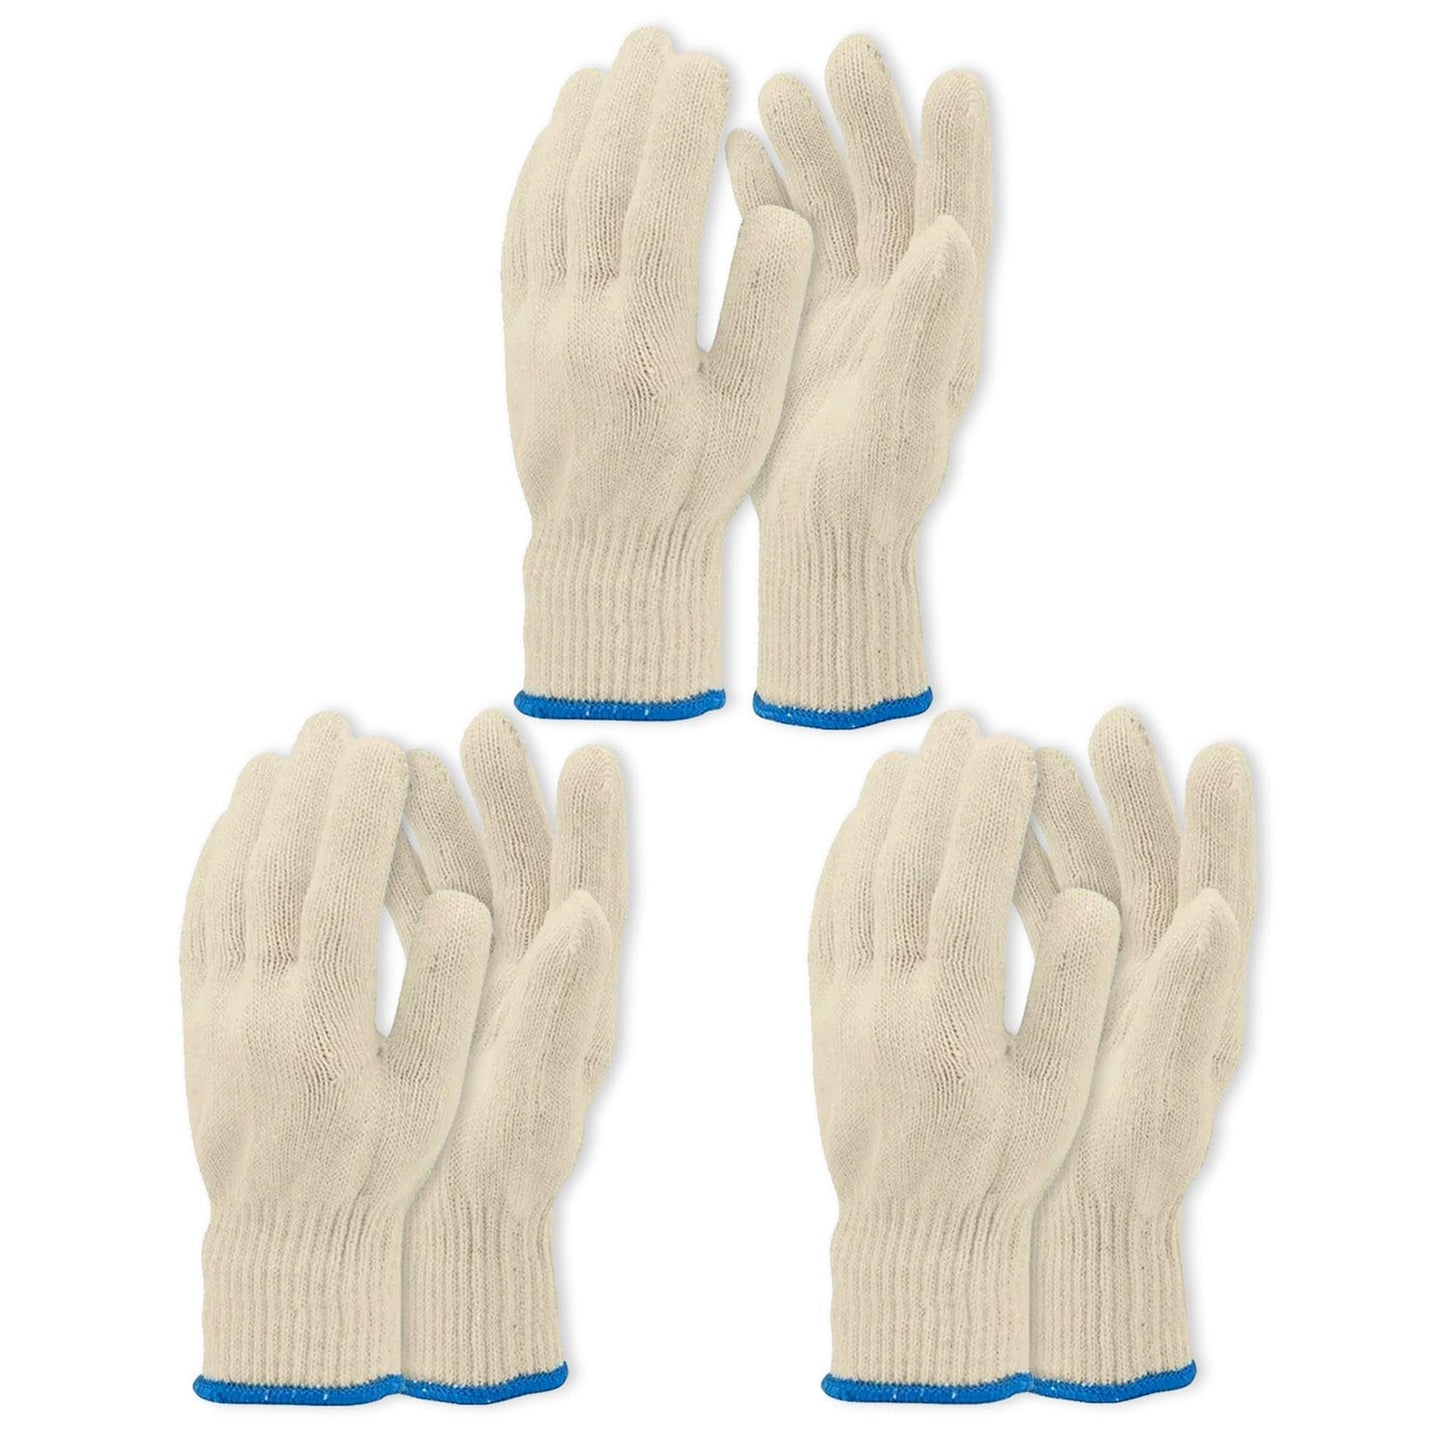 Living Today Kitchen 3 Pairs Oven Mitt BBQ Grill Gloves Heat Resistant Kitchen Hot Cooking Surfaces